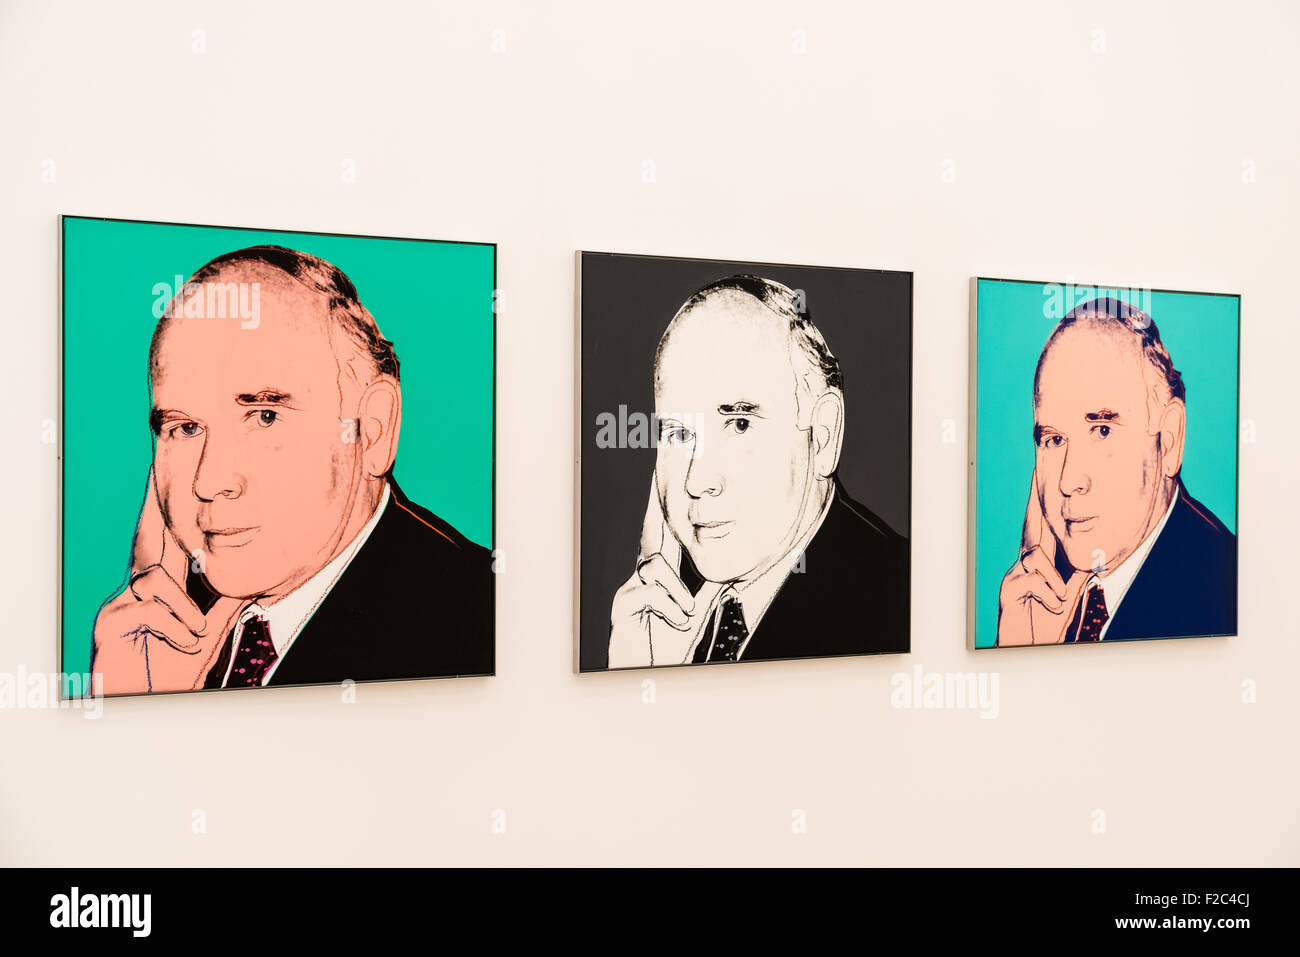 VIENNA, AUSTRIA - AUGUST 06, 2015: Peter Ludwig Portrait is a 1980 silkscreen painting by American pop artist Andy Warhol. Stock Photo